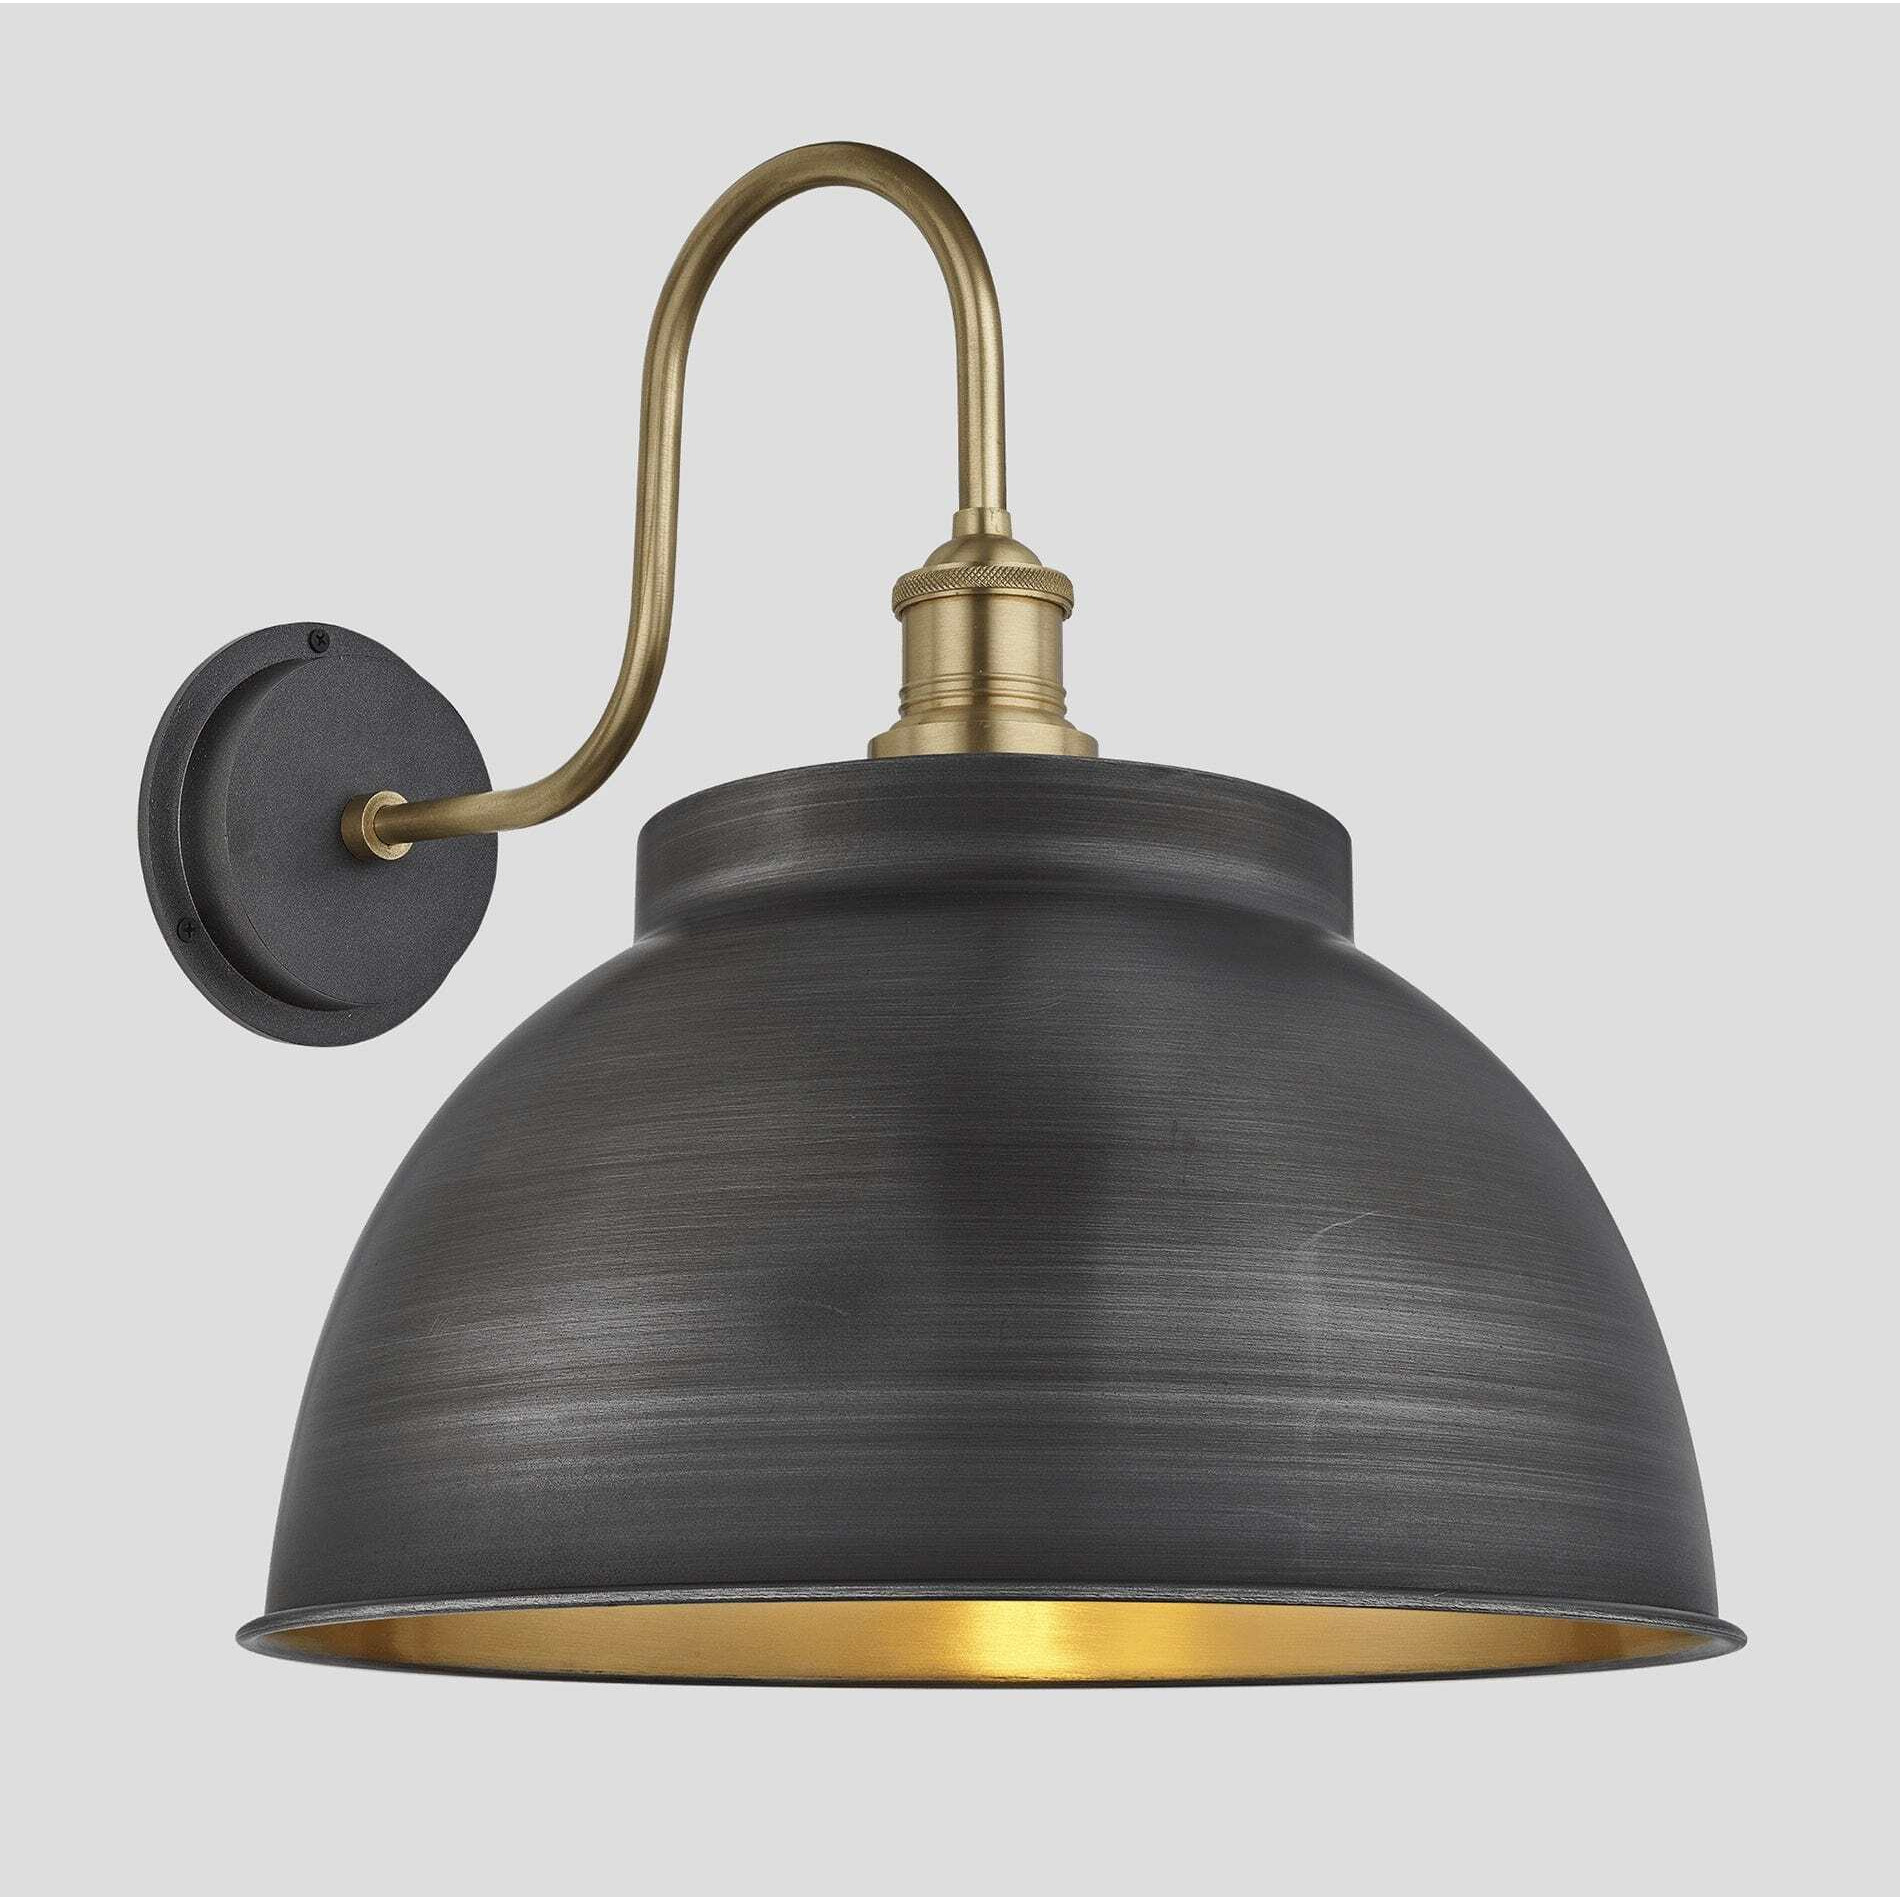 Swan Neck Outdoor & Bathroom Dome Wall Light - 17 Inch - Pewter & Brass - Pre-order - Expected w/c 13th of May